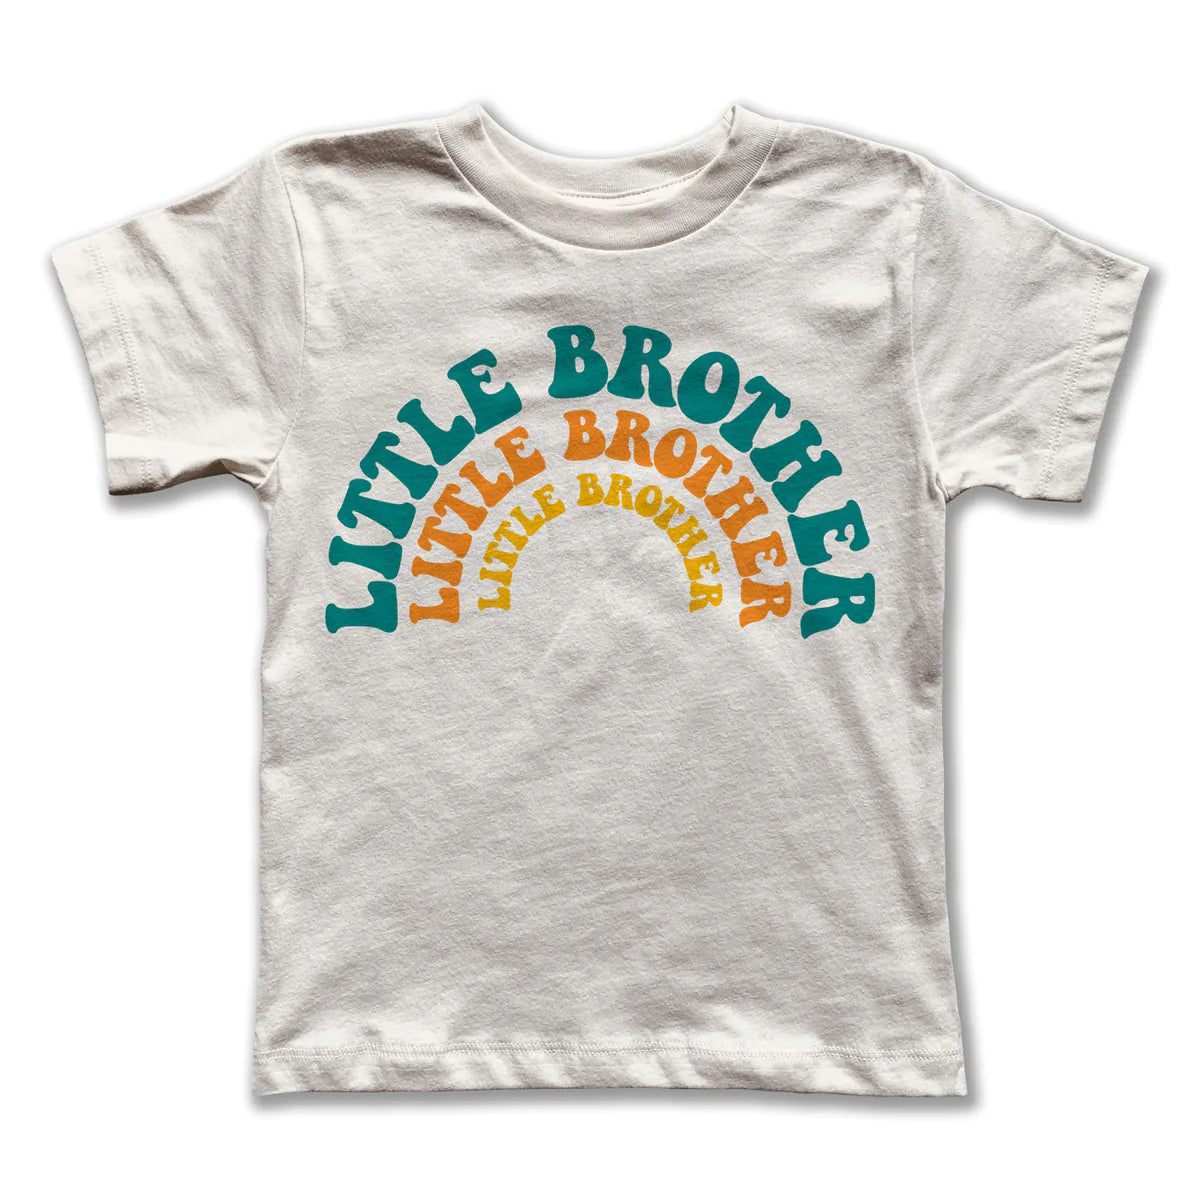 Little Brother Tee